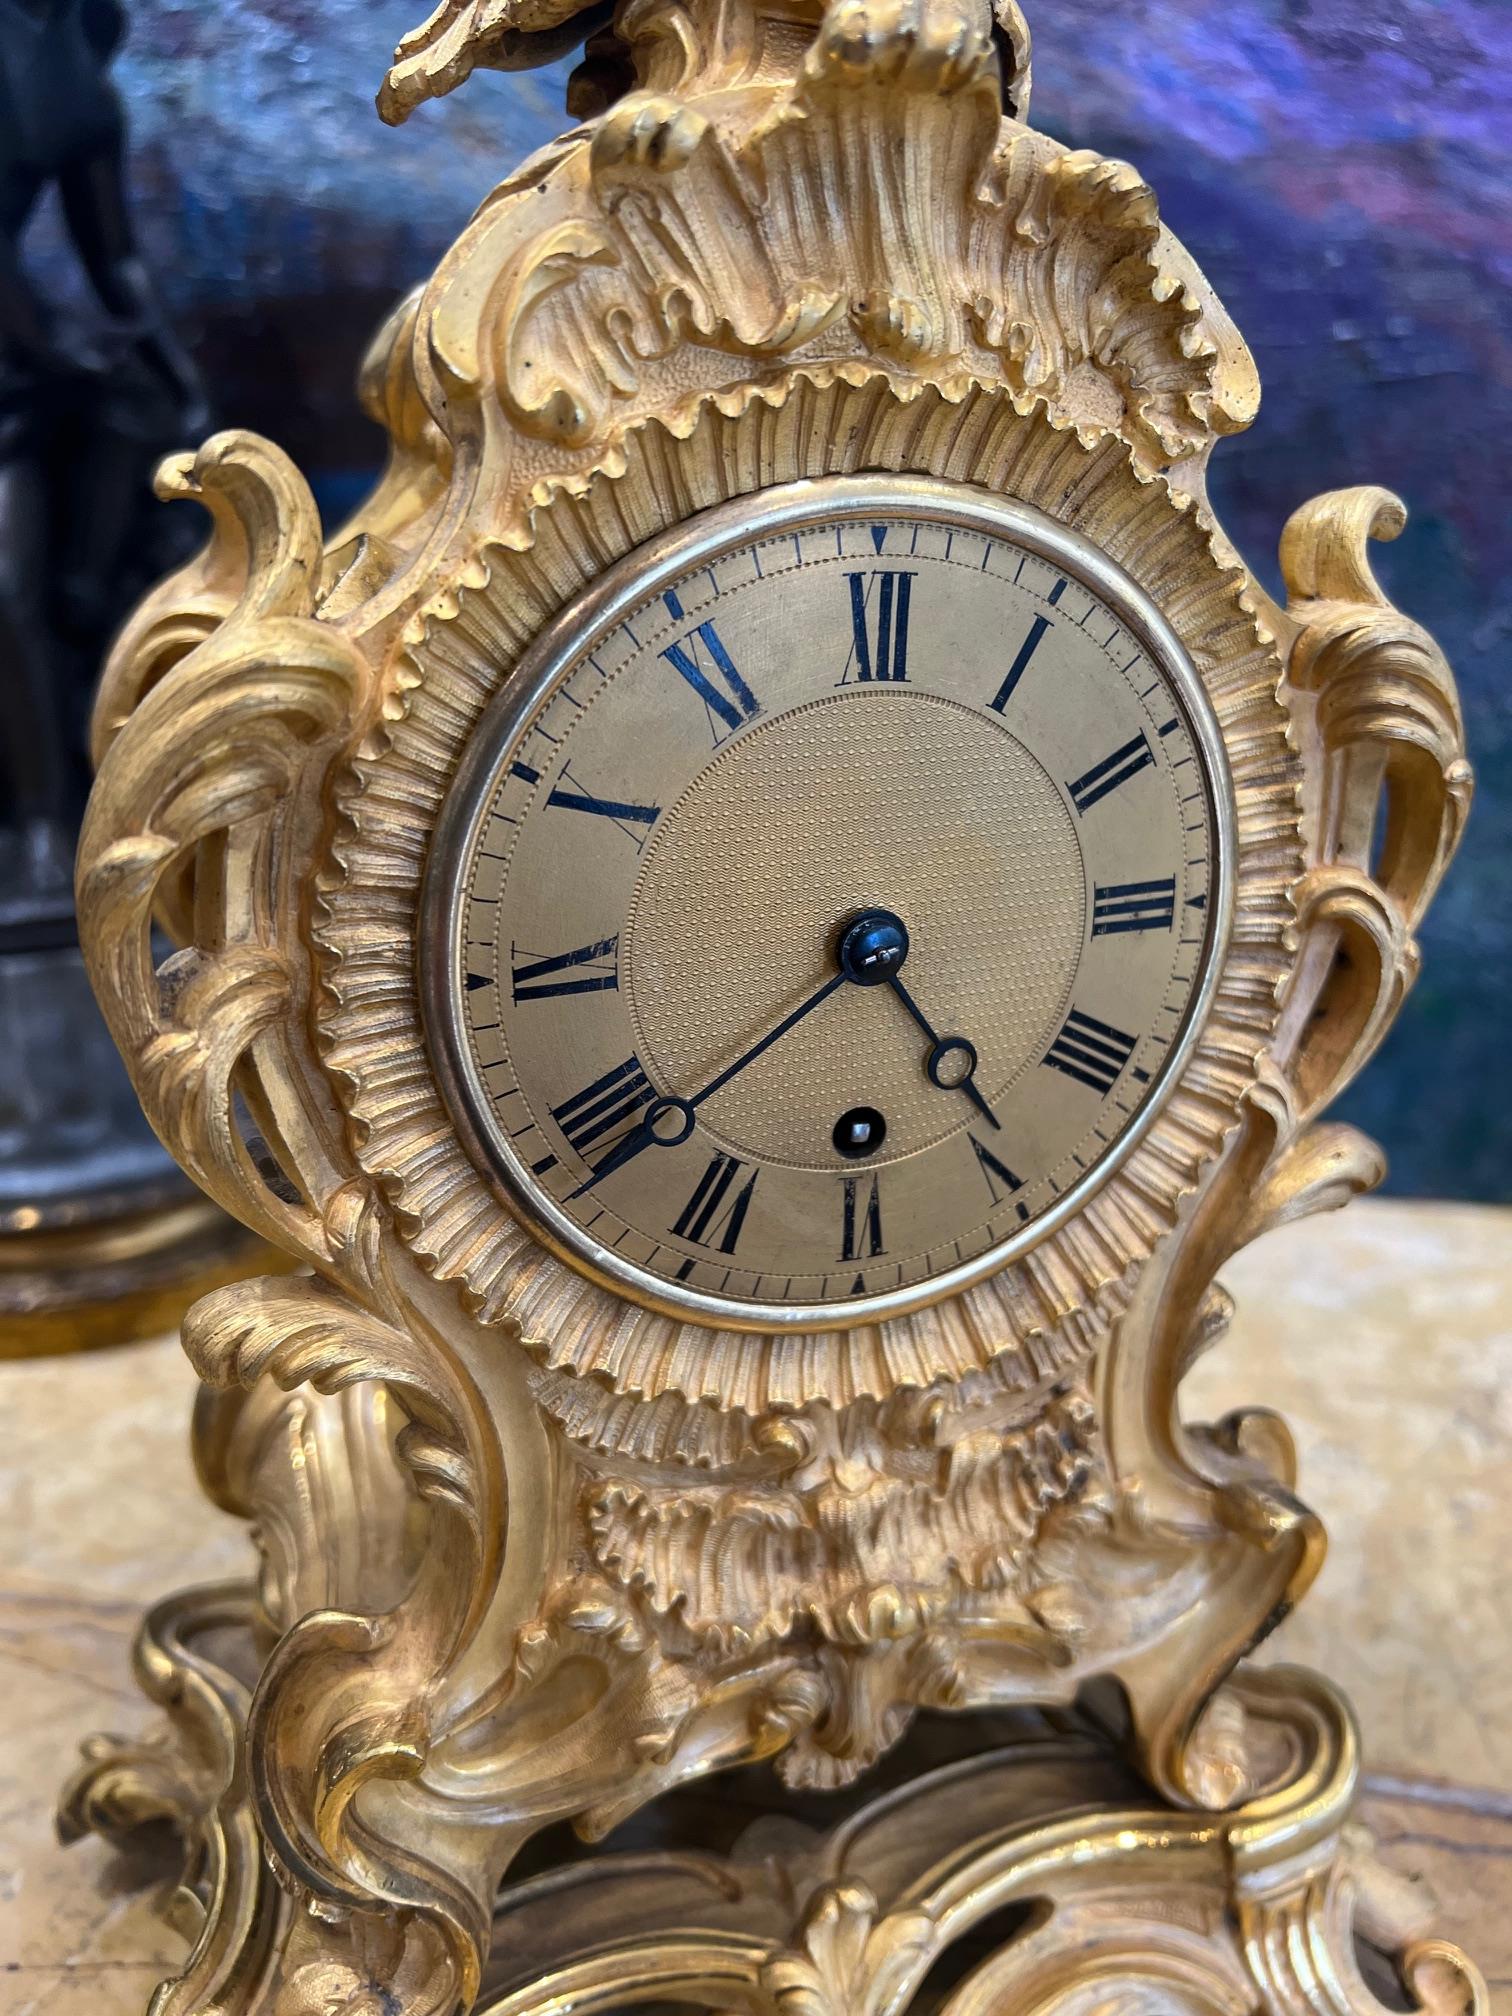 AN EARLY 19TH CENTURY ENGLISH GILT BRONZE FUSEE MANTEL CLOCK - Image 7 of 8